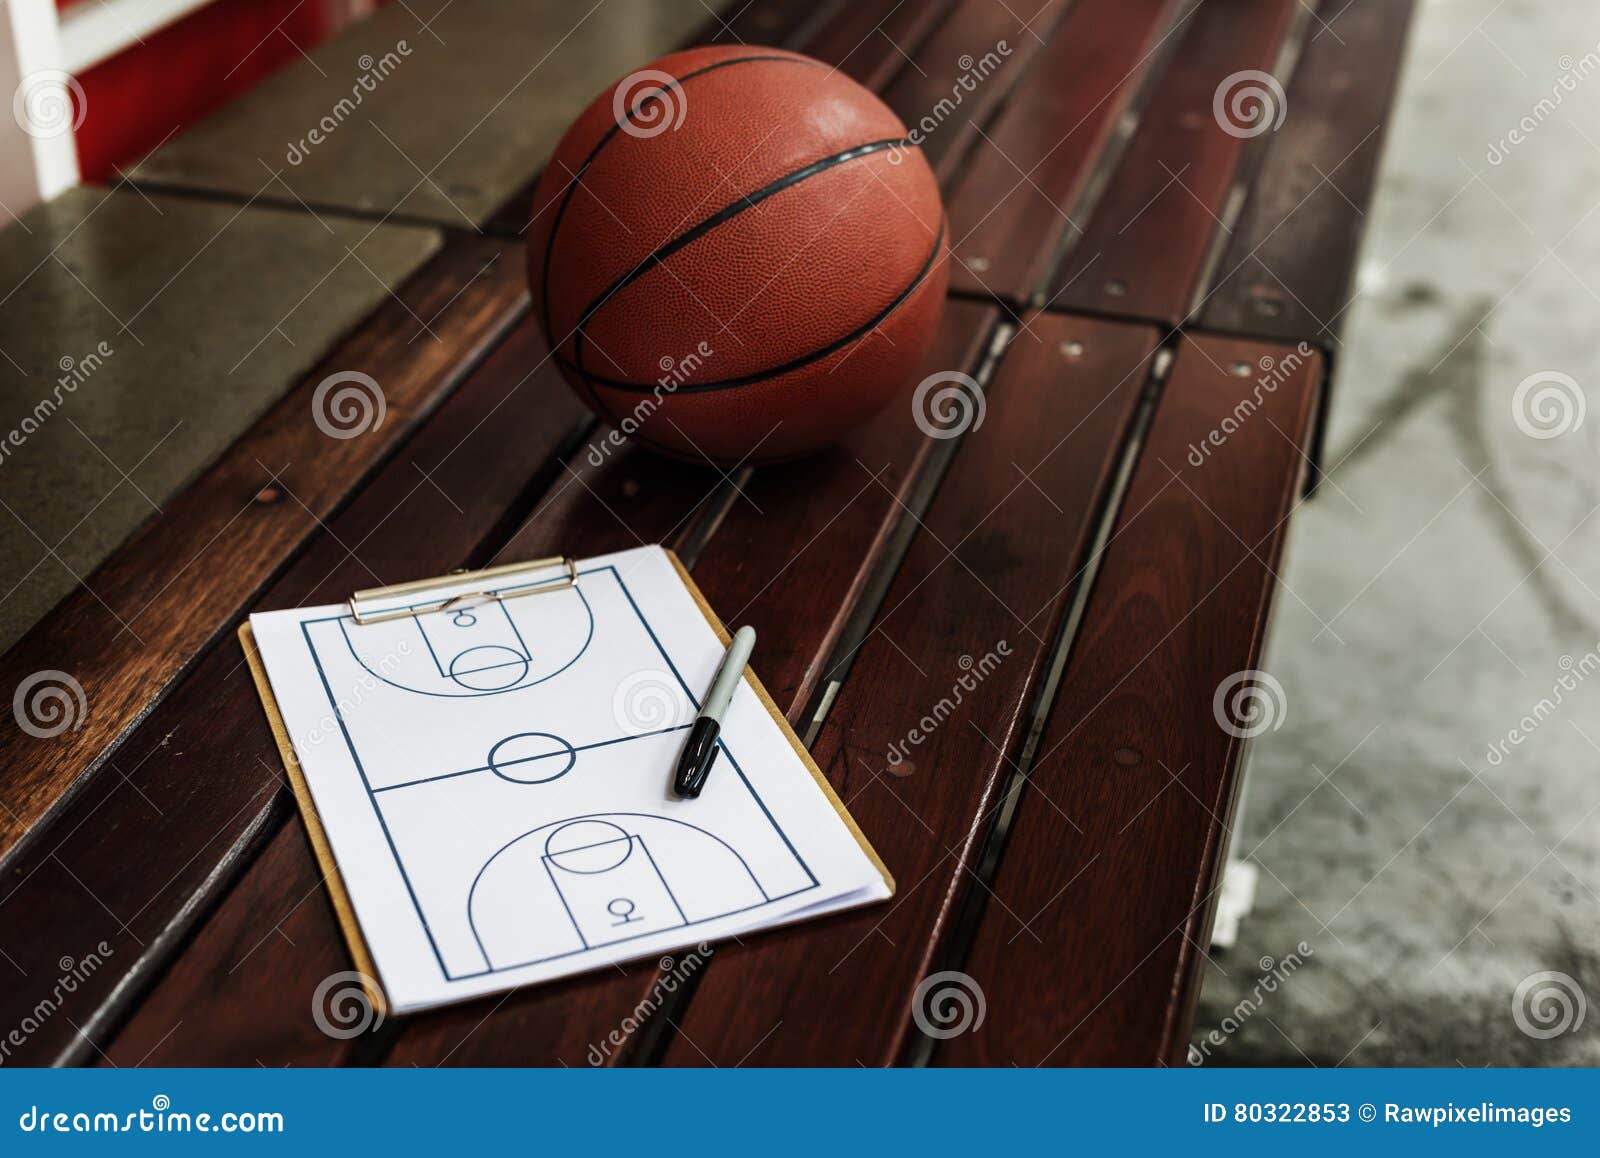 Basketball Sport Athletic Activity Game Skill Ball Concept Stock